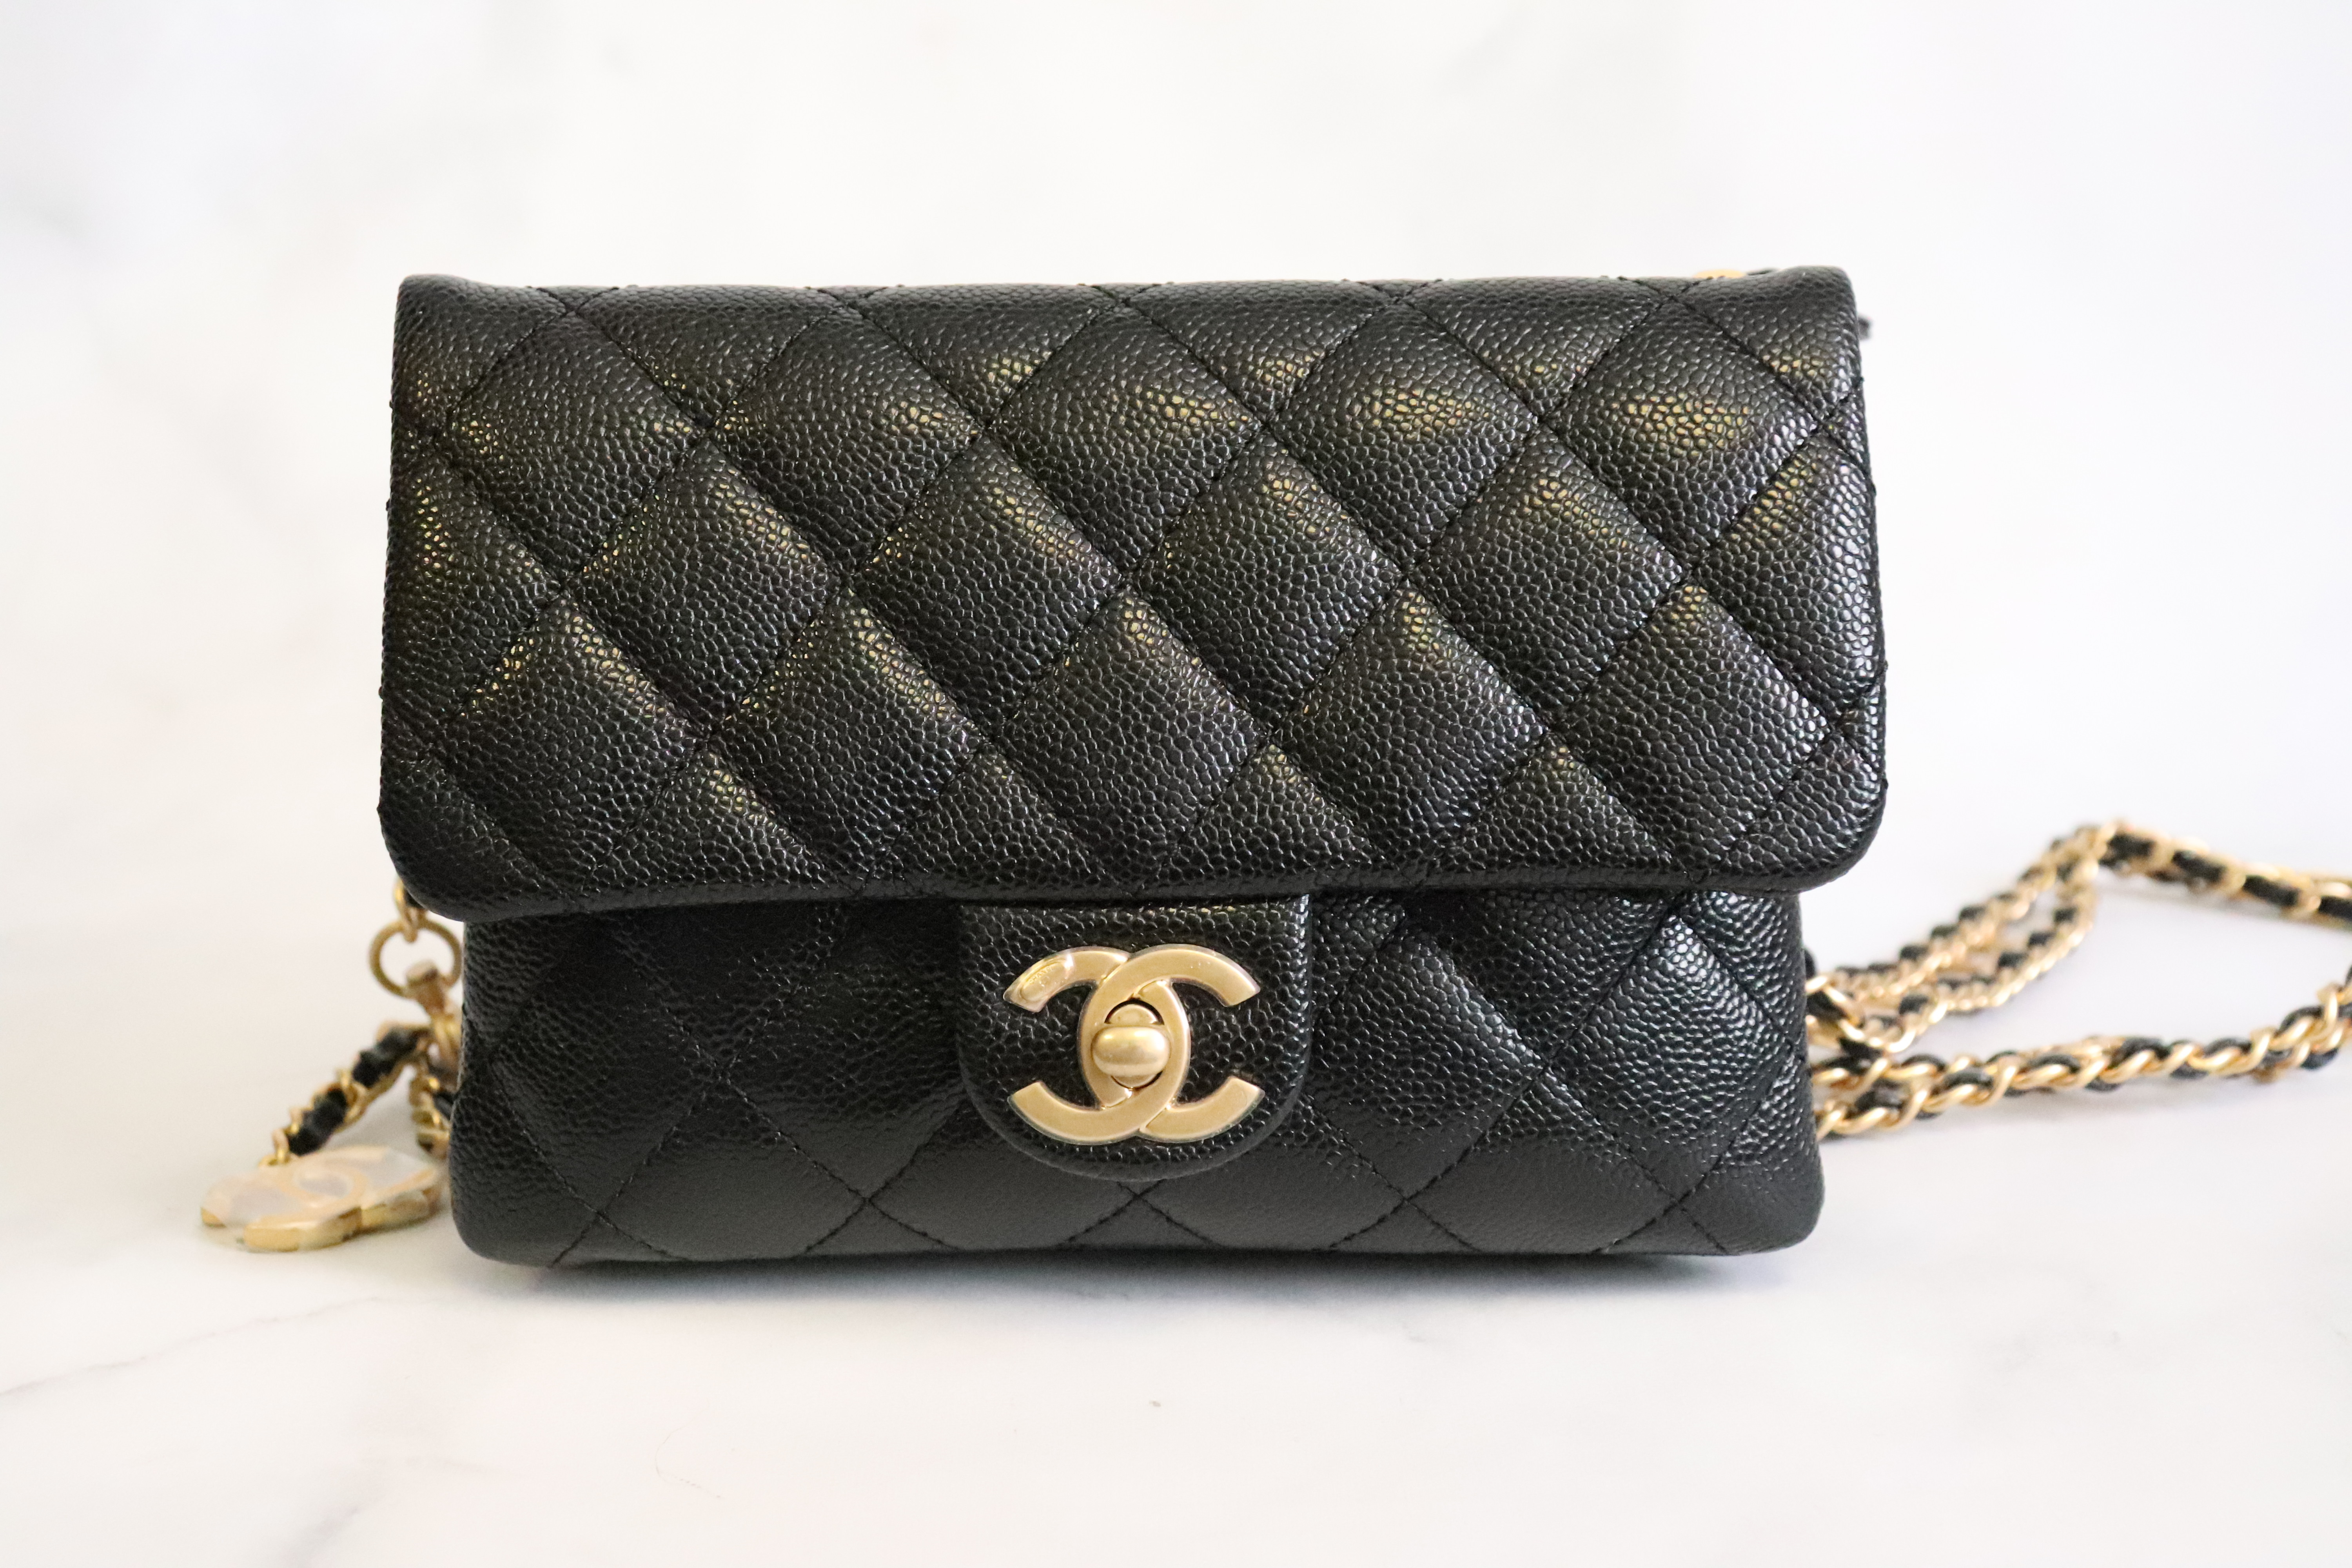 Chanel Waist Bag, 22S, BLack Caviar Leather, Gold Hardware, New in